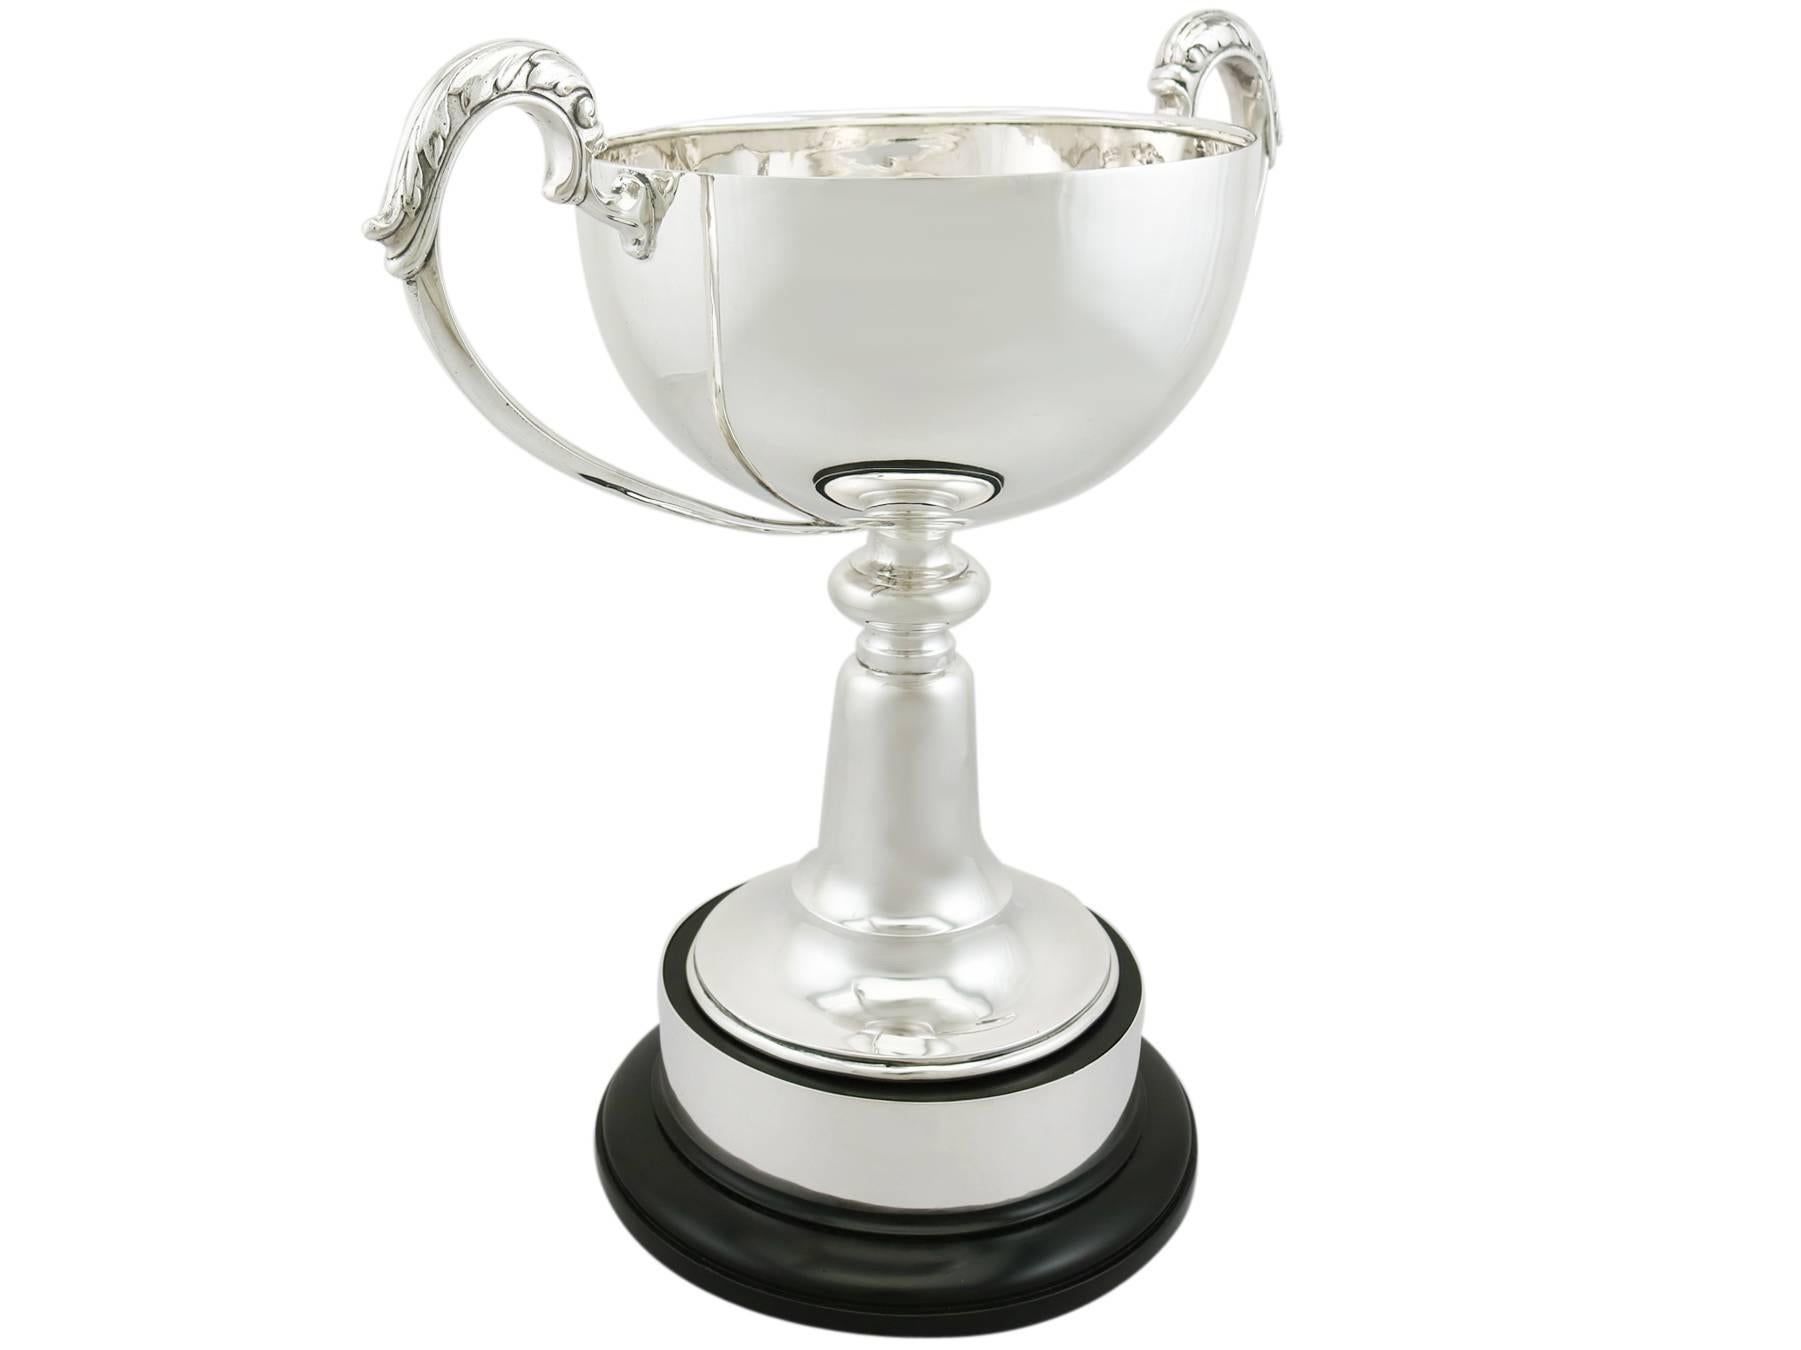 An exceptional, fine and impressive antique George V English sterling silver presentation cup; an addition to AC Silver's presentation silverware collection.

This exceptional antique sterling silver presentation cup has a circular rounded form to